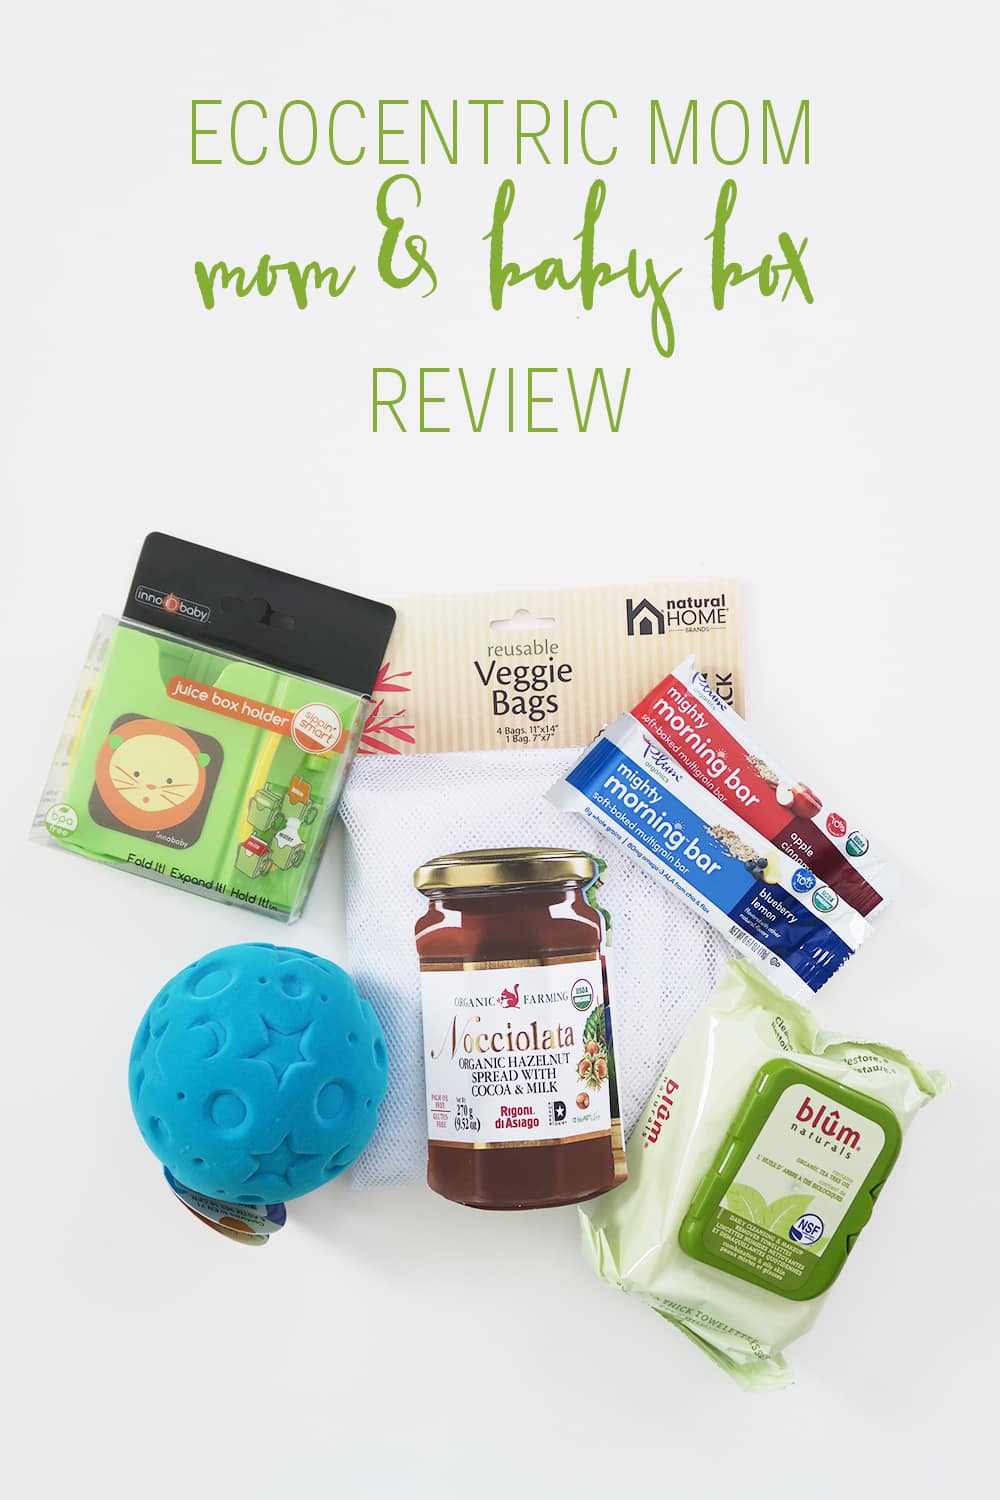 A review of November's Ecocentric Mom Box for Mom and Baby. A must have subscription box for babies and their mamas!